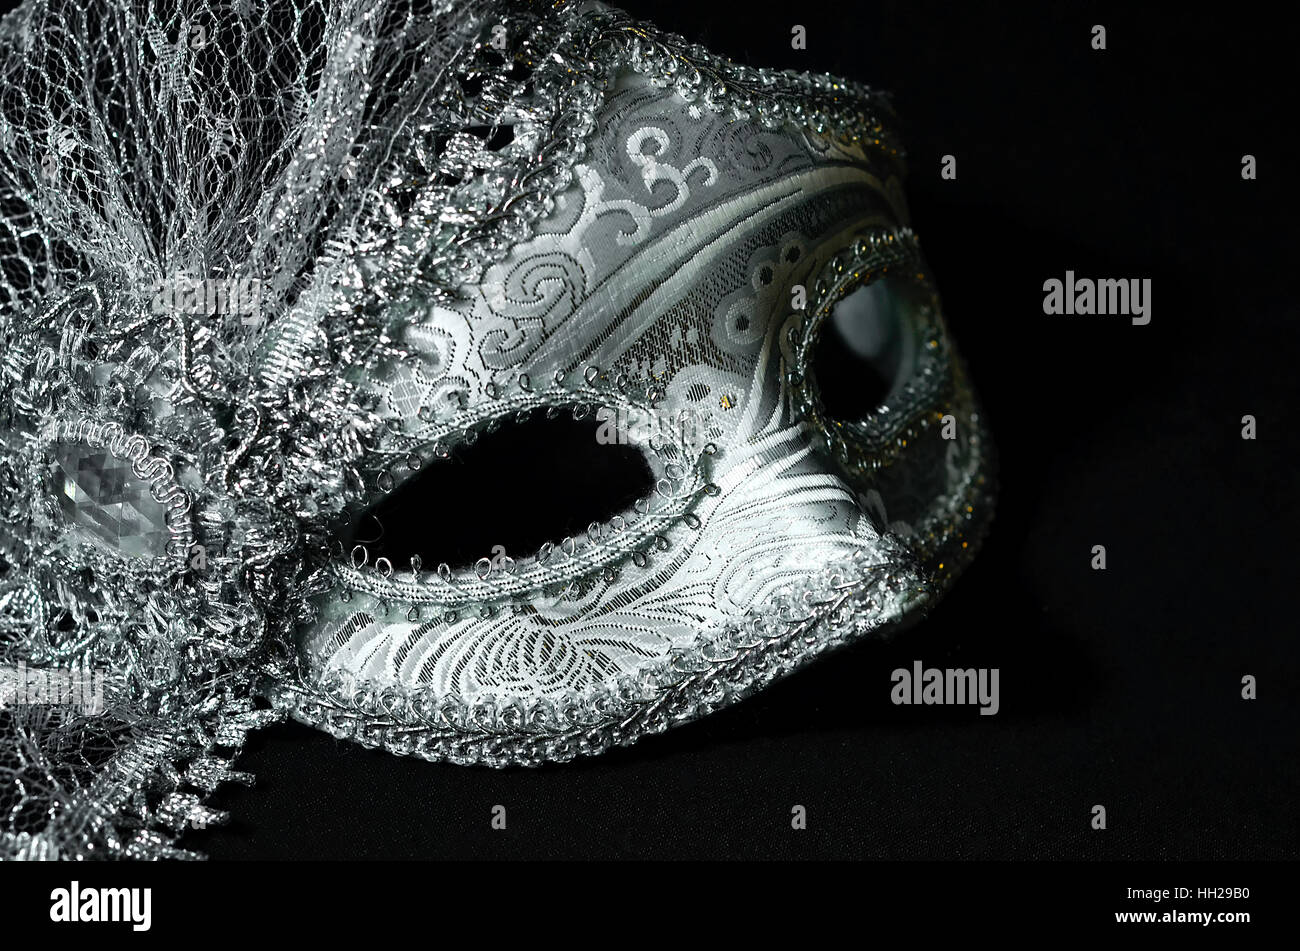 A close up of a silver masquerade mask on black background Stock Photo